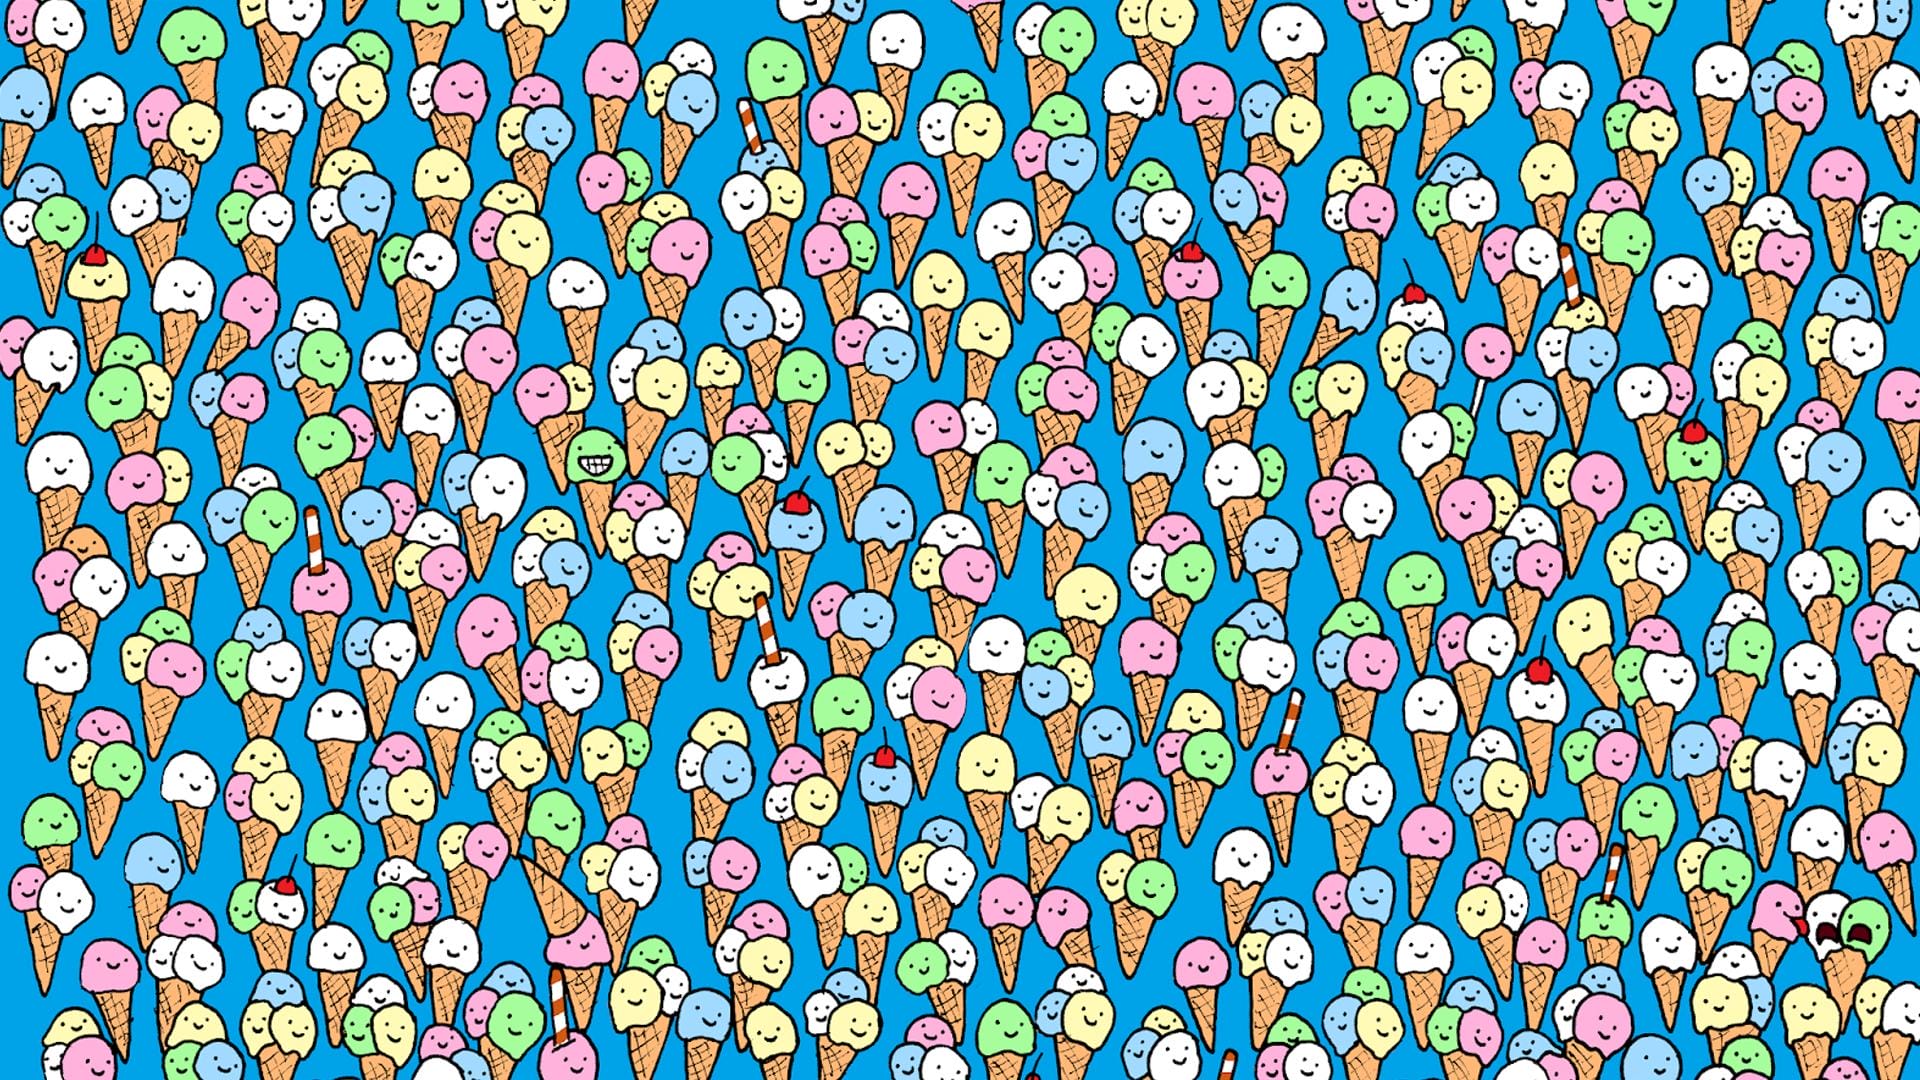 Mind-bending optical illusion shows a lollipop hidden among the ice creams - can YOU spot it?